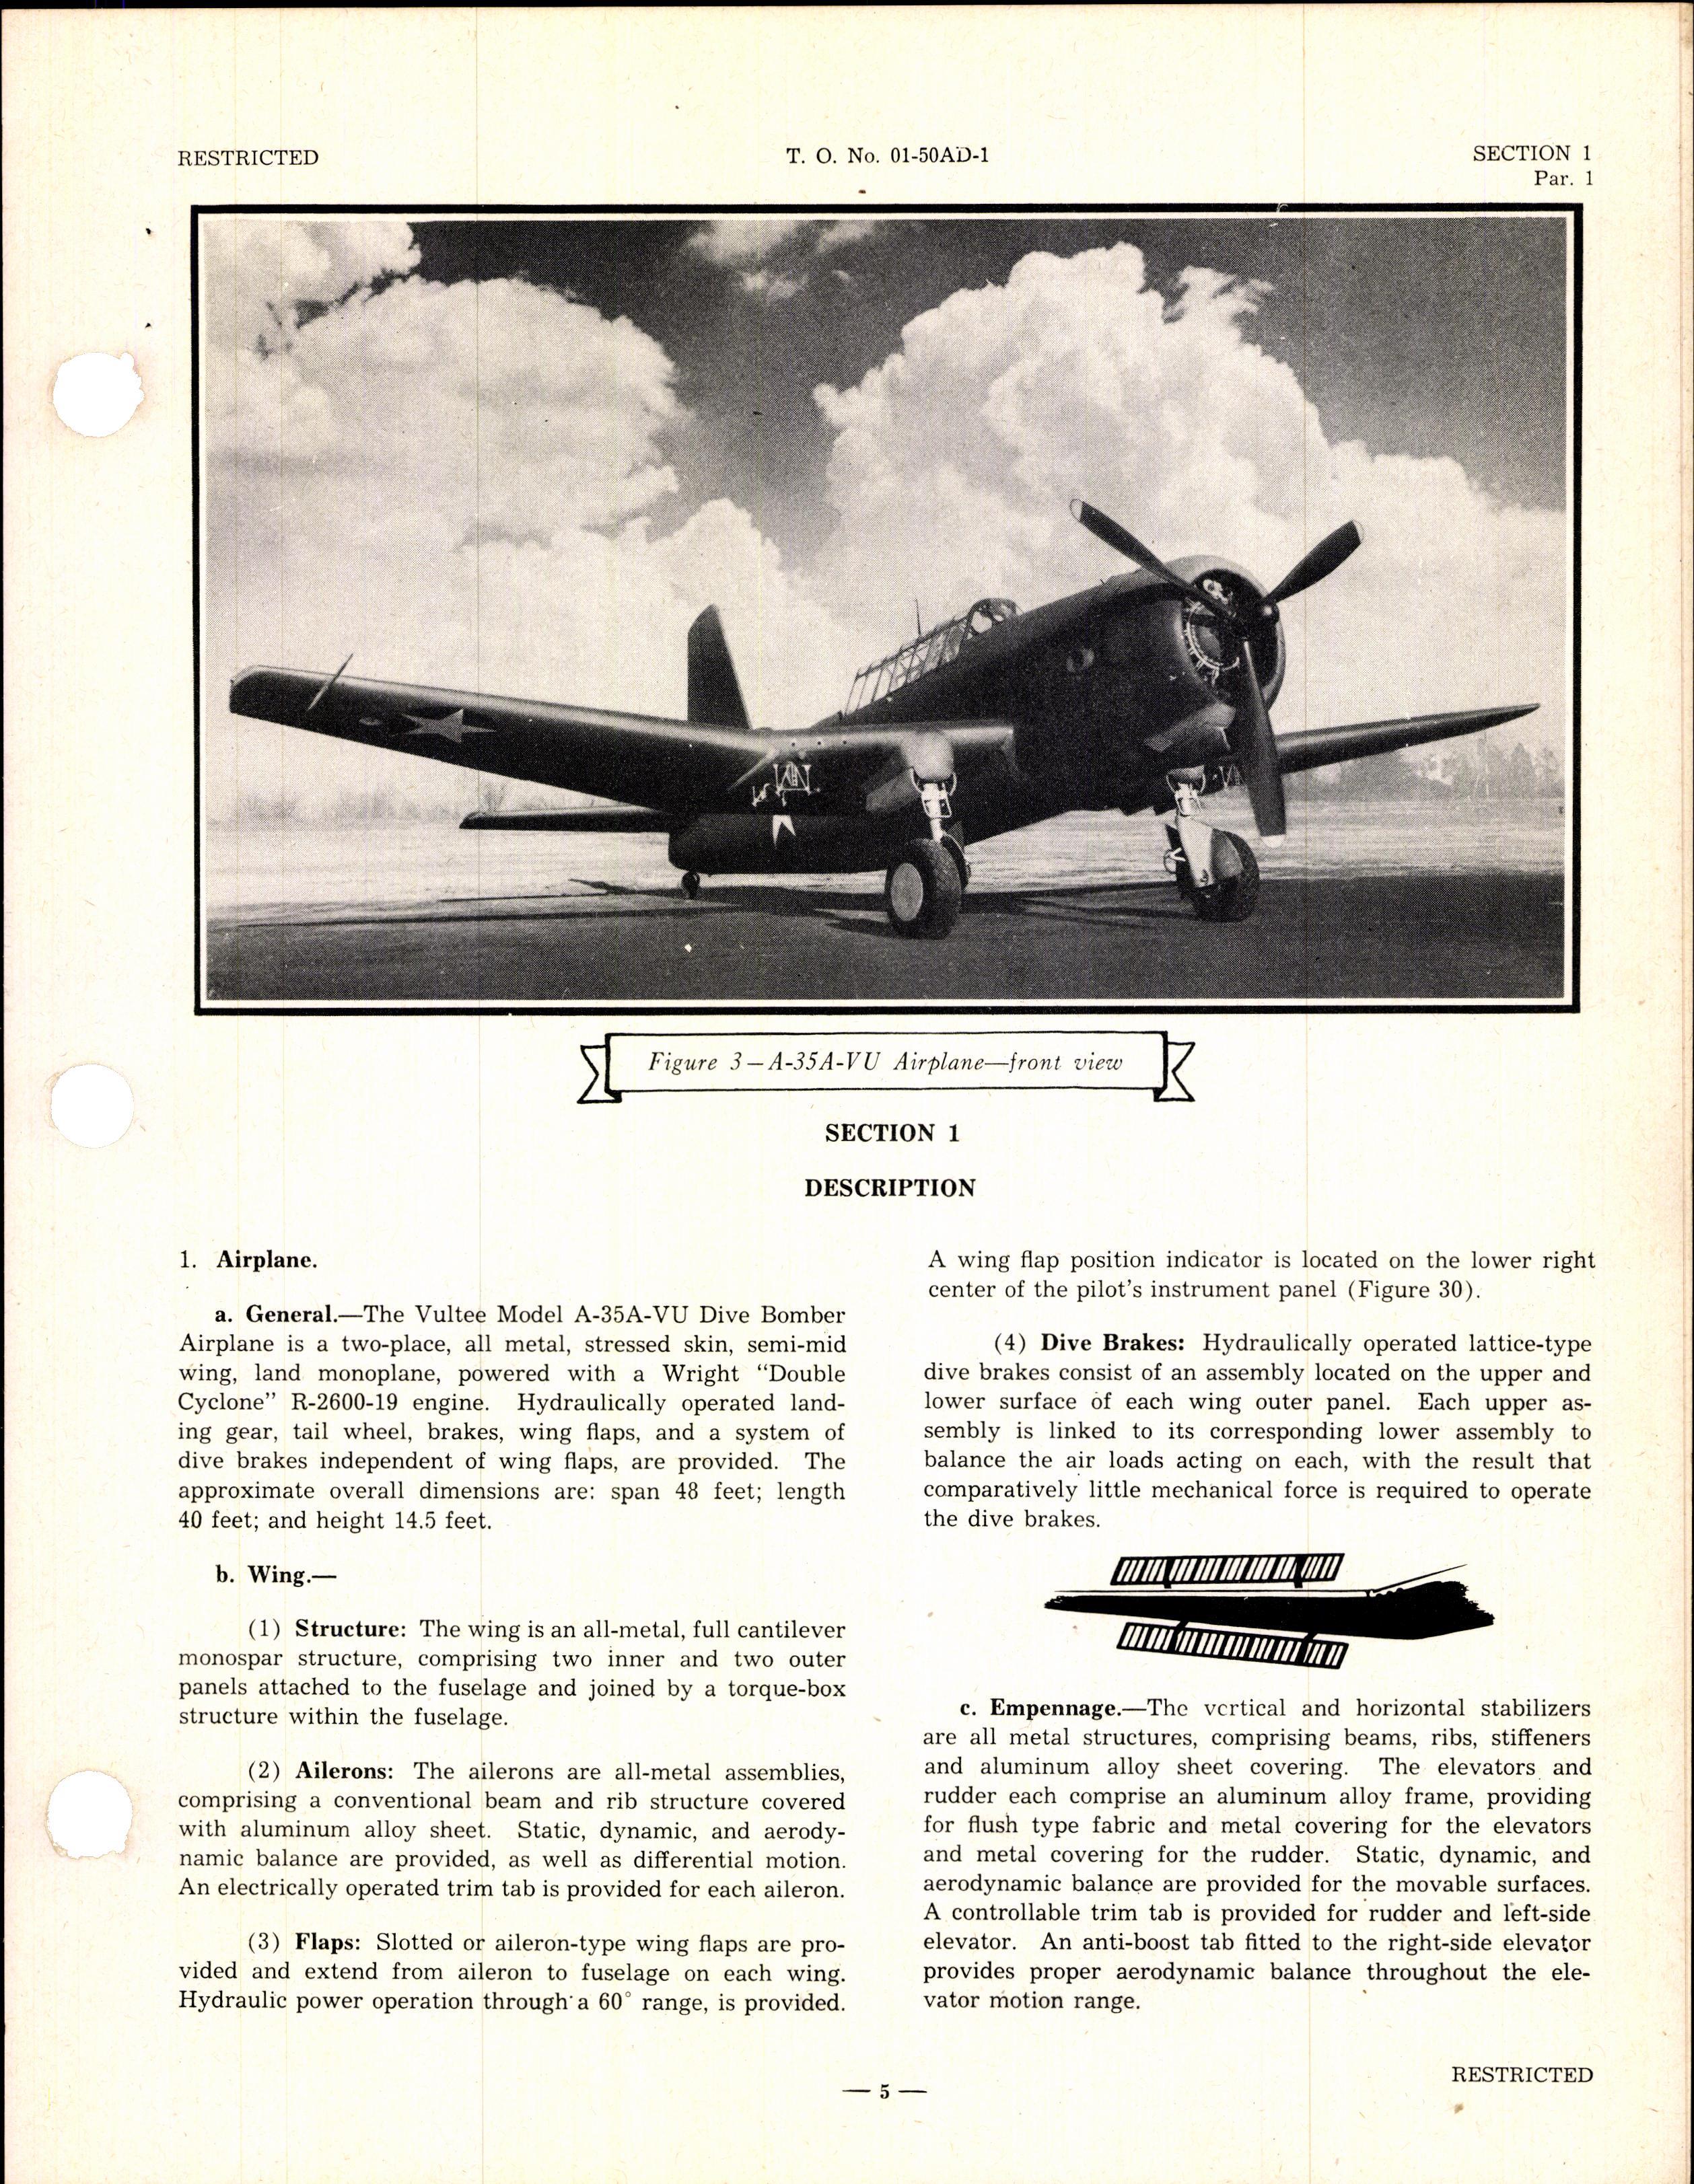 Sample page 7 from AirCorps Library document: Pilot's Flight Operating Instructions for Army Model A-35A-1-VN